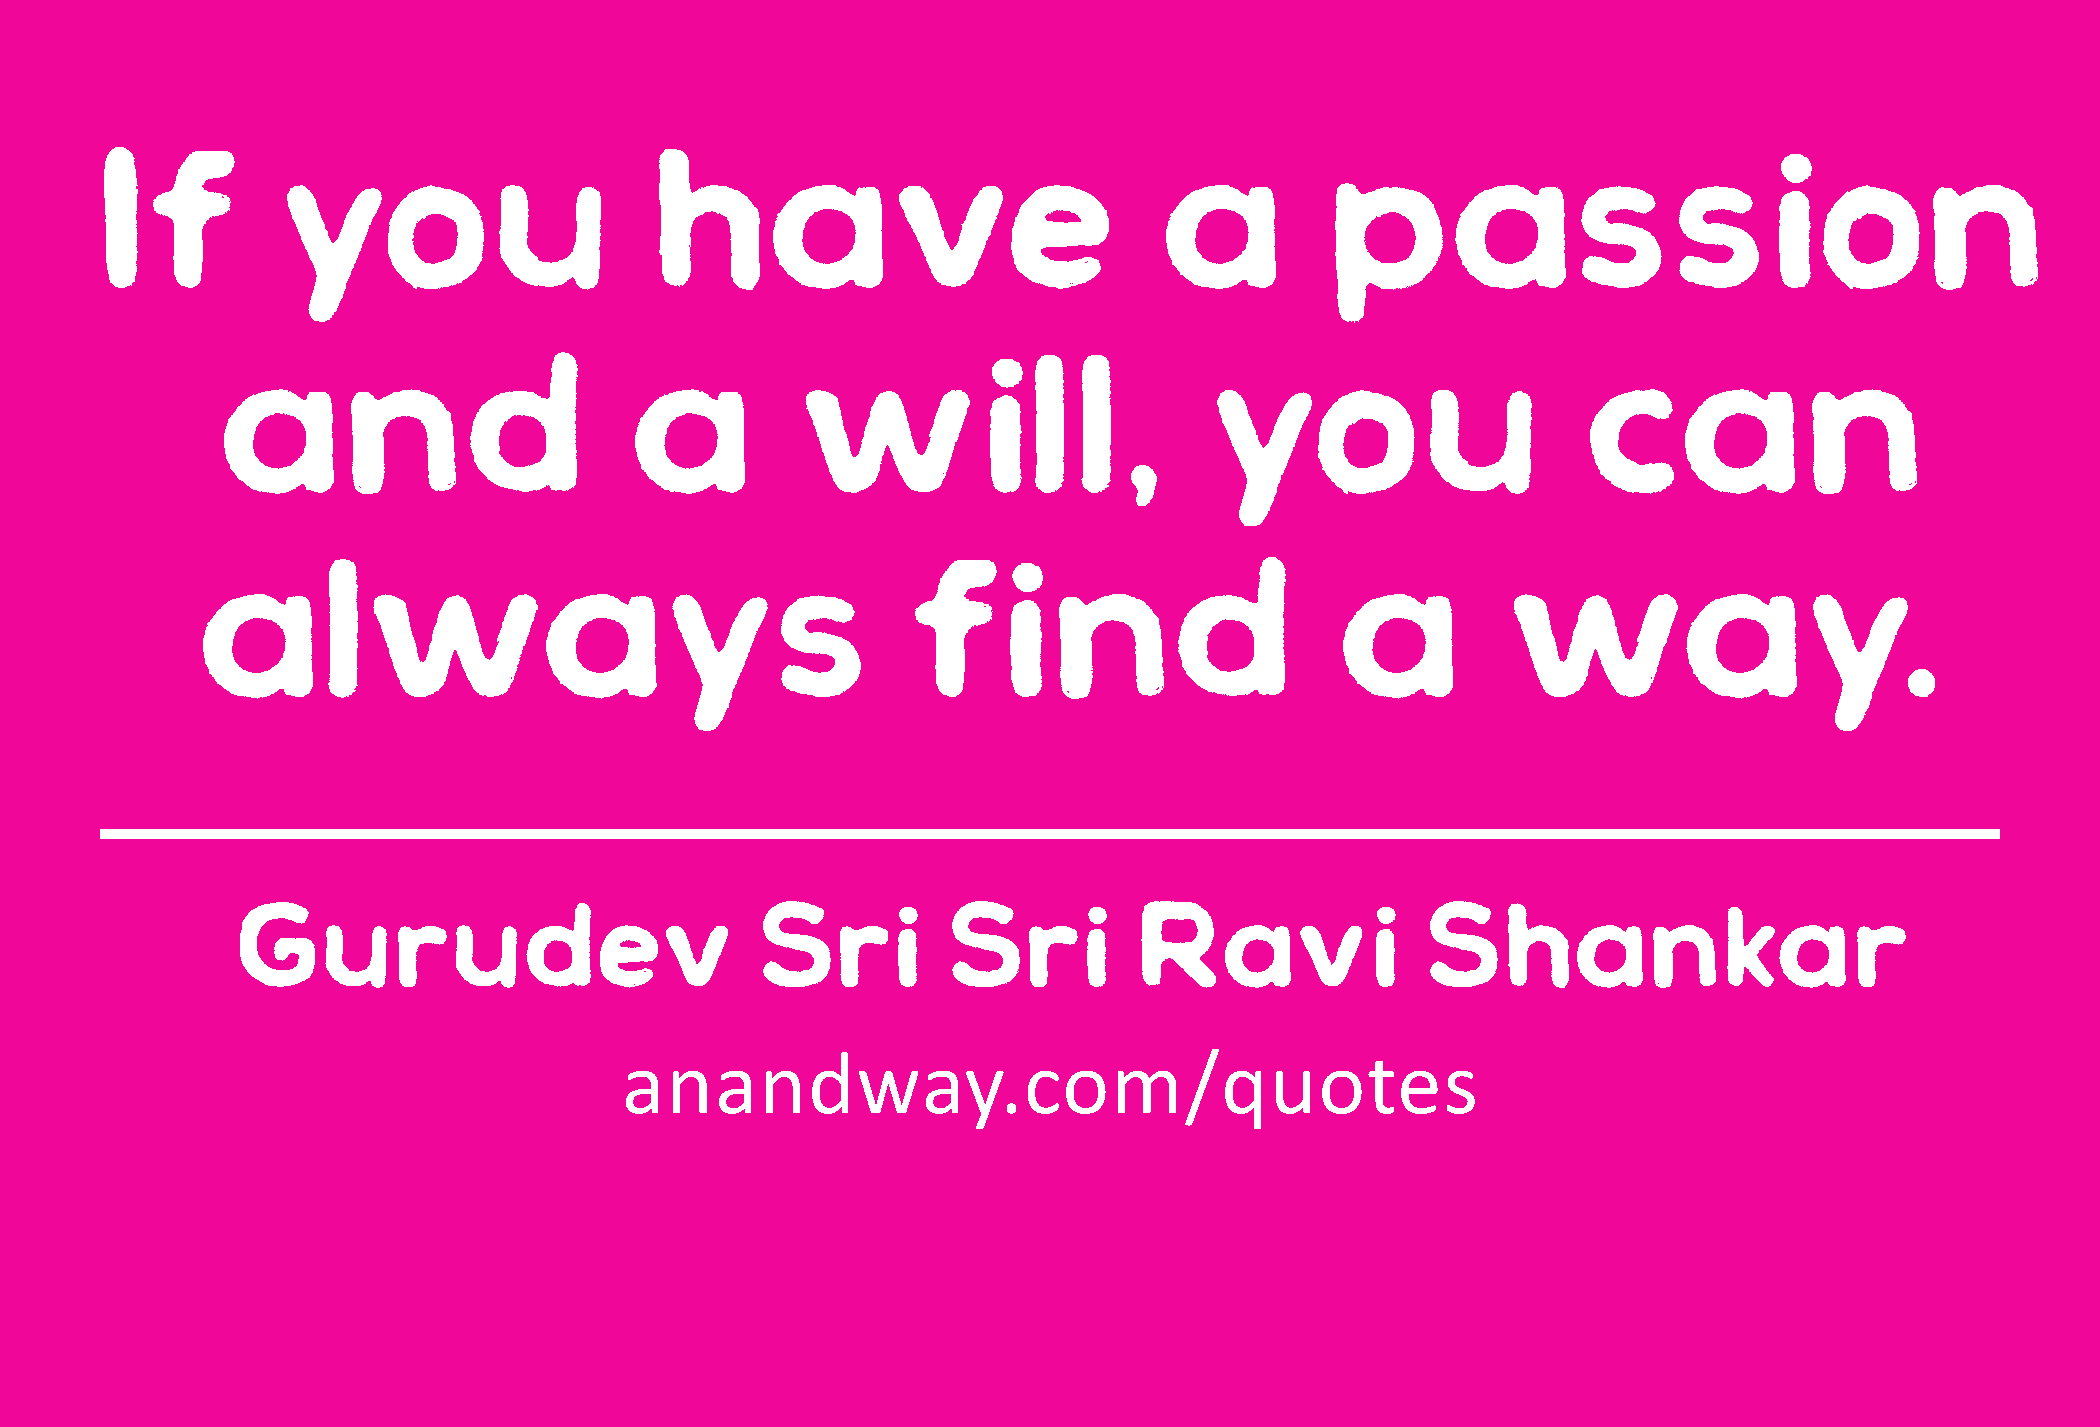 If you have a passion and a will, you can always find a way.
 -Gurudev Sri Sri Ravi Shankar